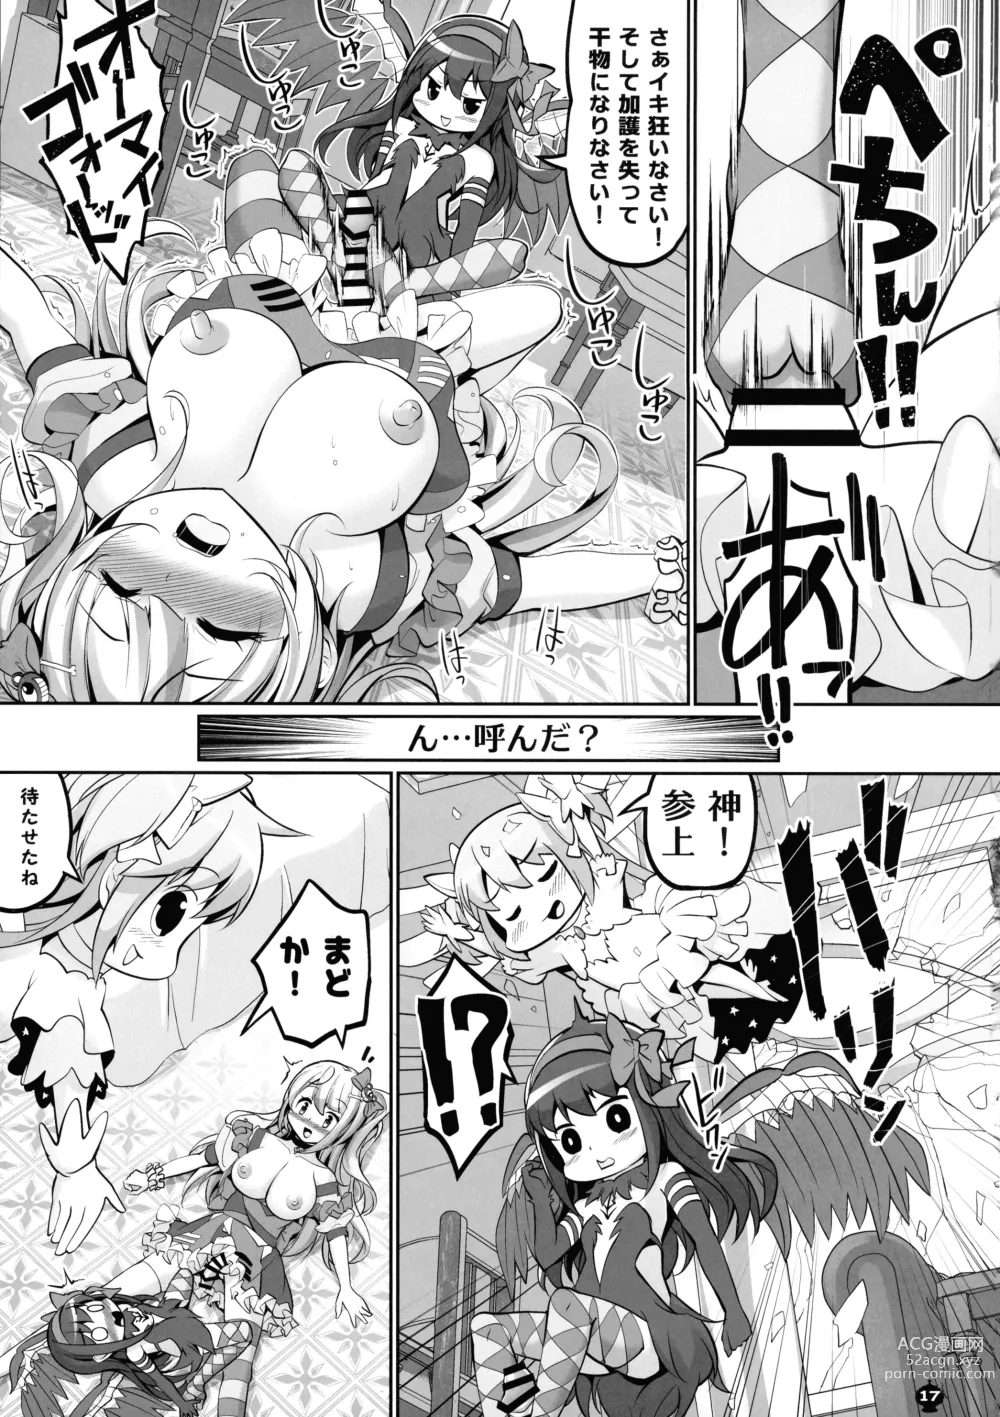 Page 17 of doujinshi Blast Super Chou Gorilla in HELL